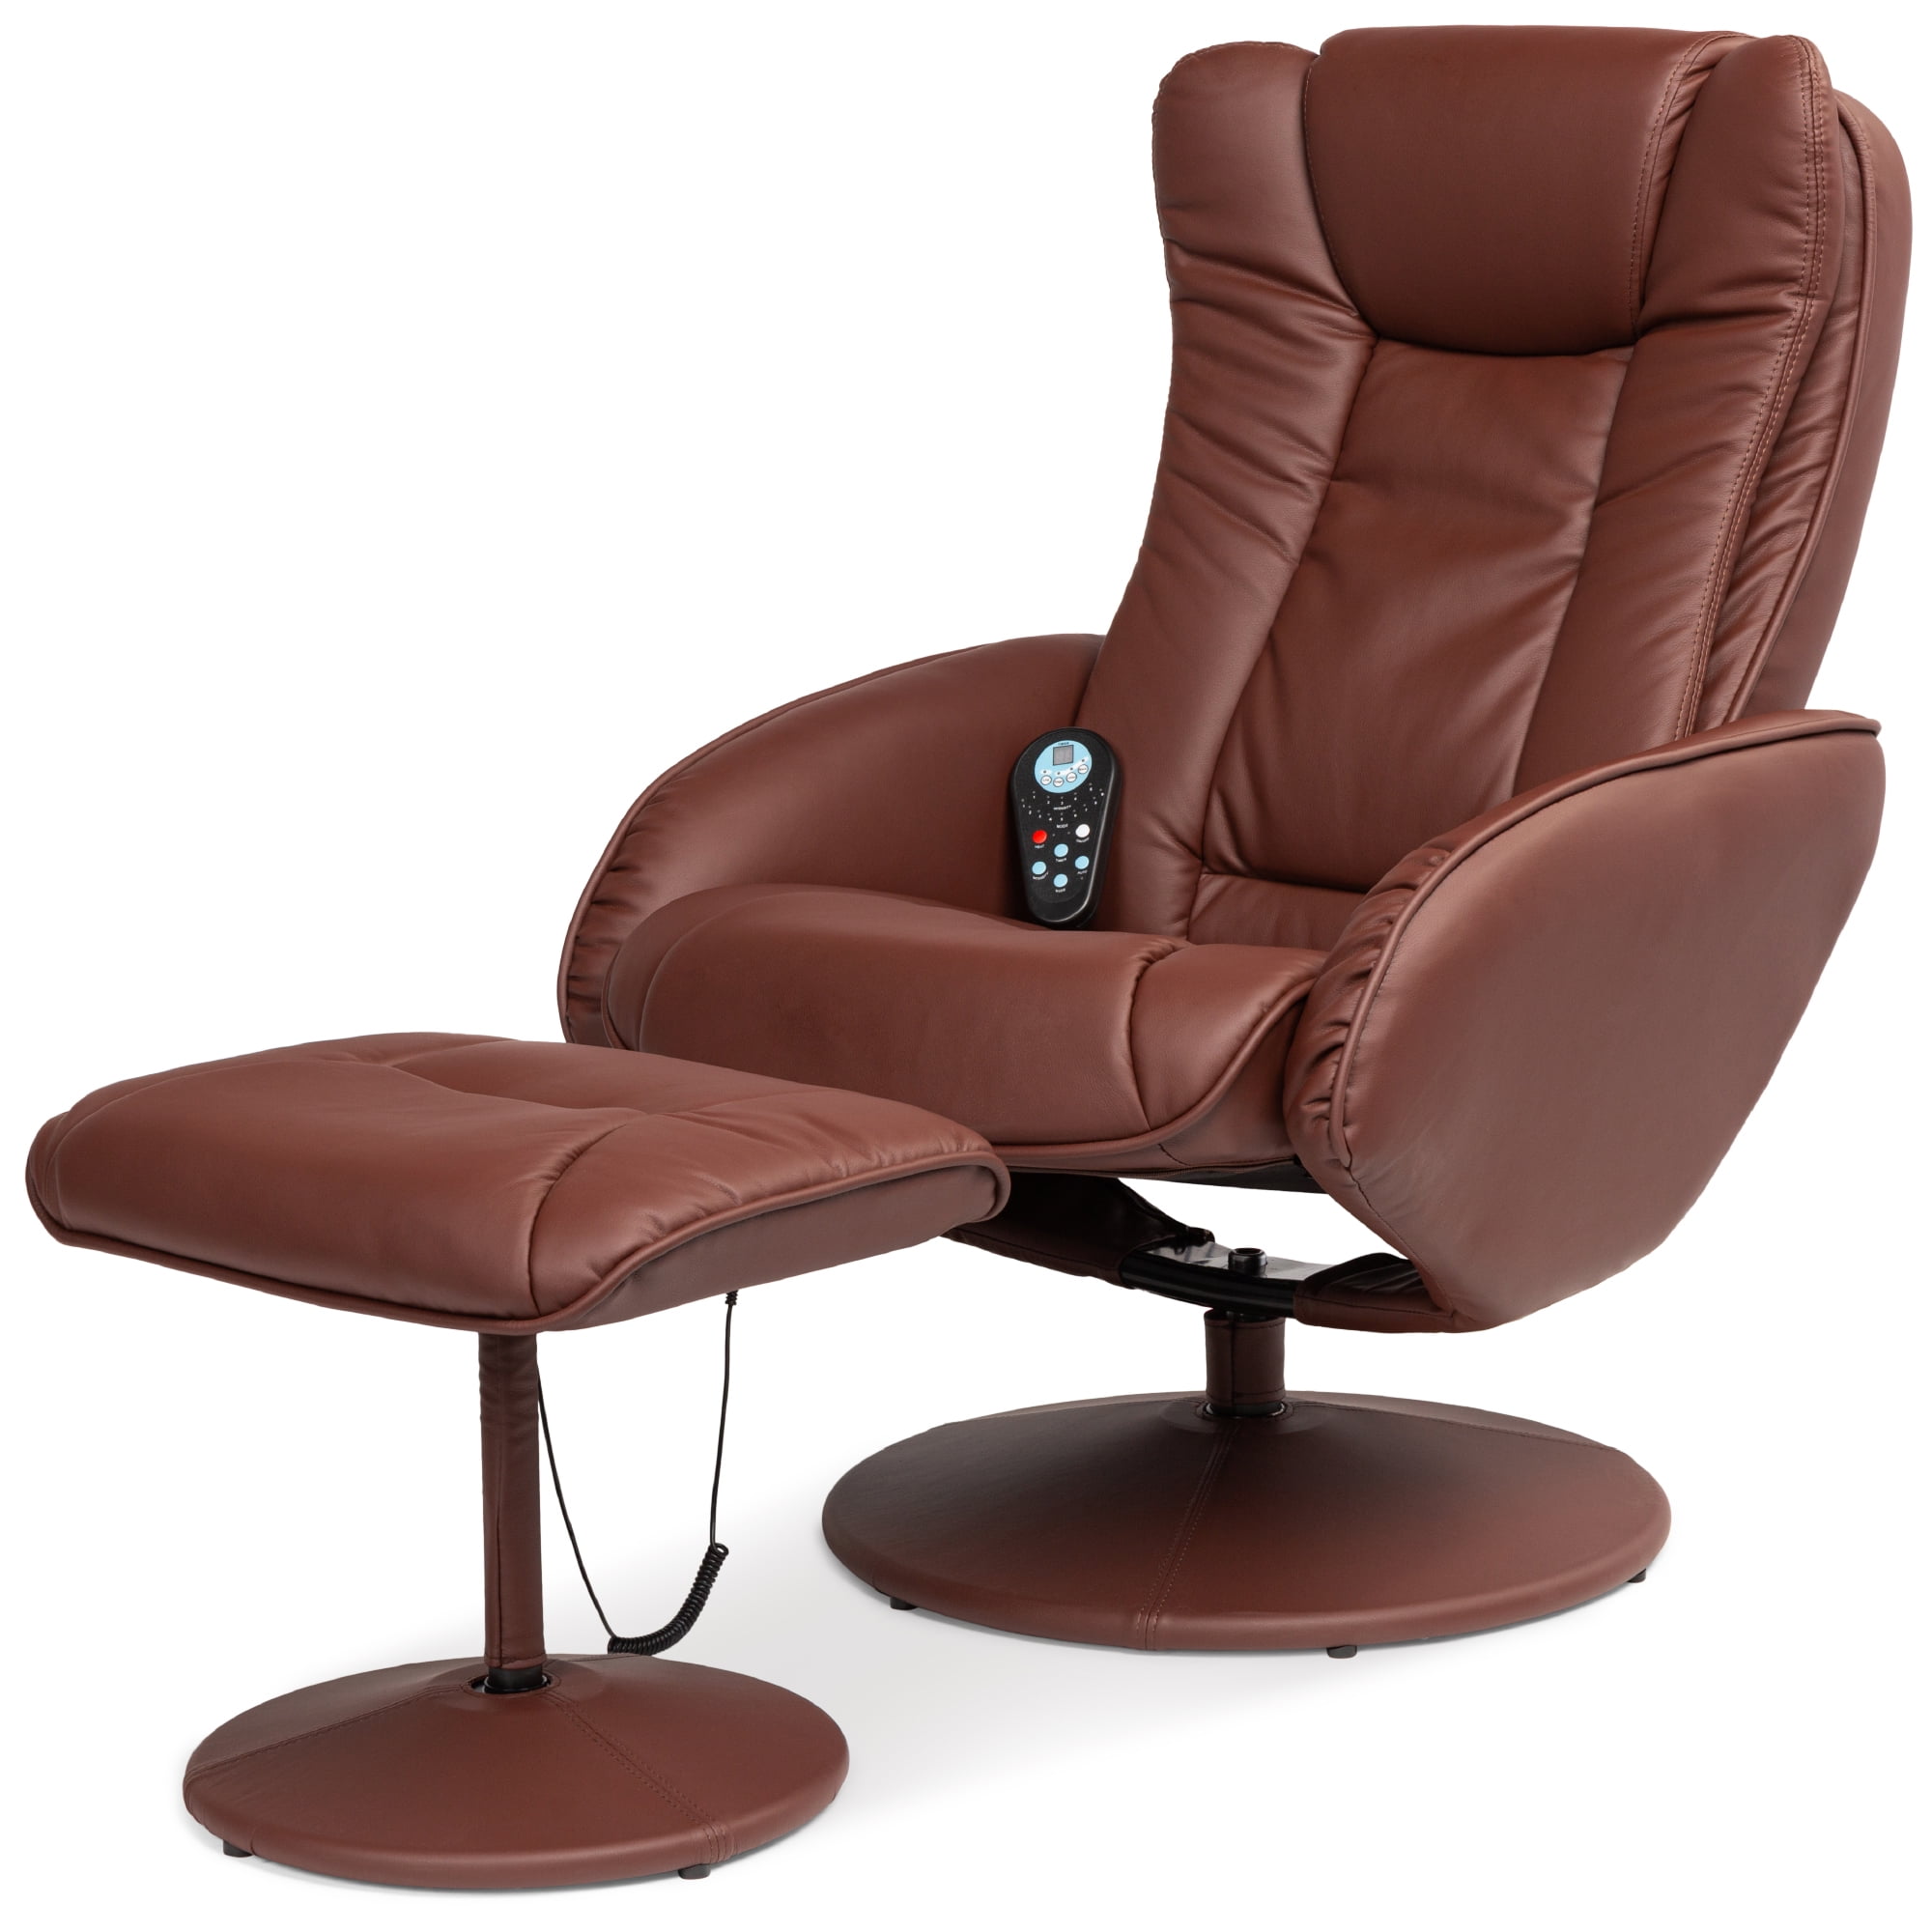 Stool Ottoman Remote Control, Real Leather Massage Chairs